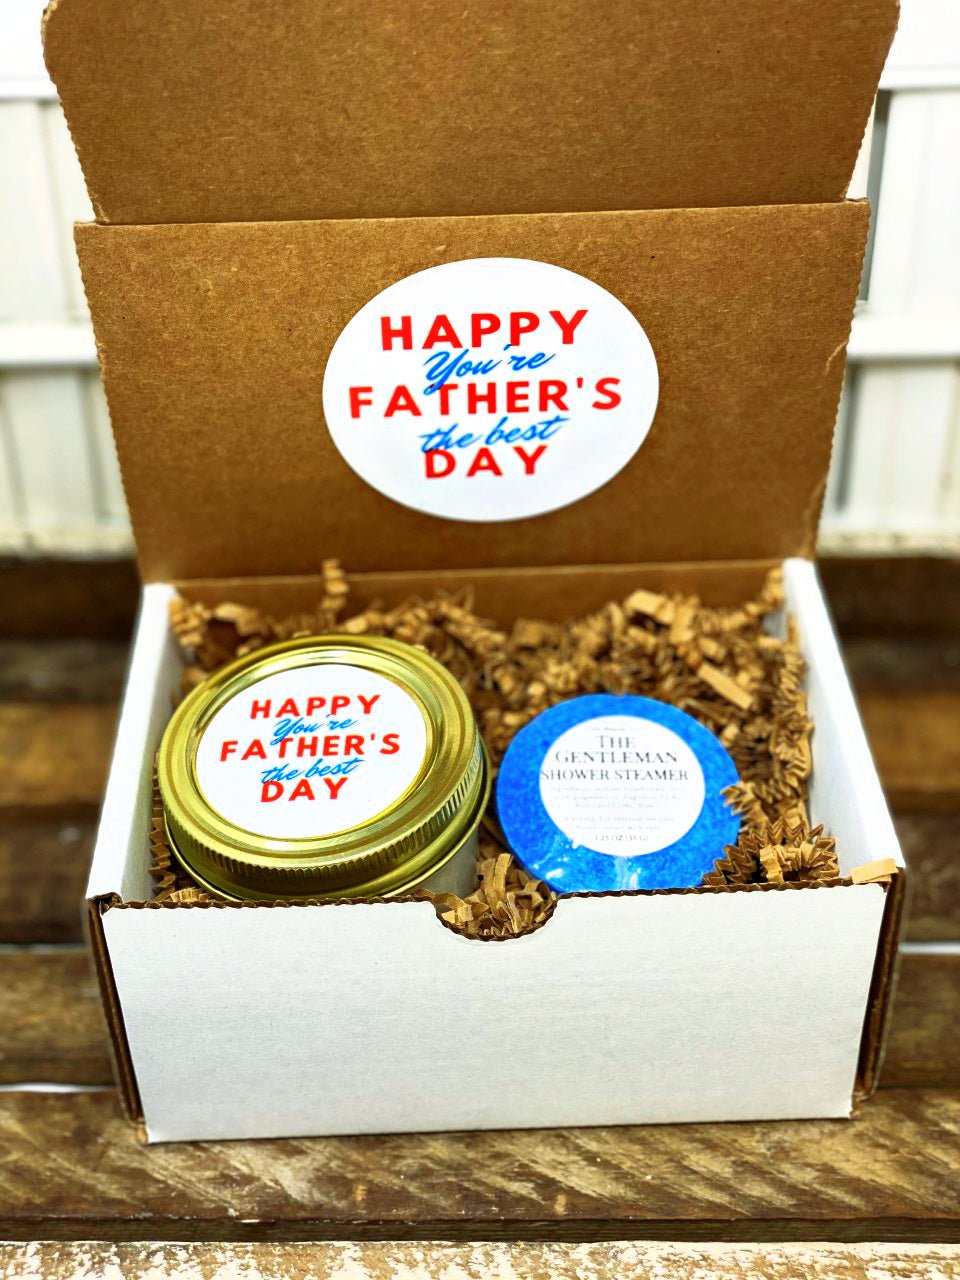 Father's Day Gift Box - Shower steamer and candle - Oily BlendsFather's Day Gift Box - Shower steamer and candle